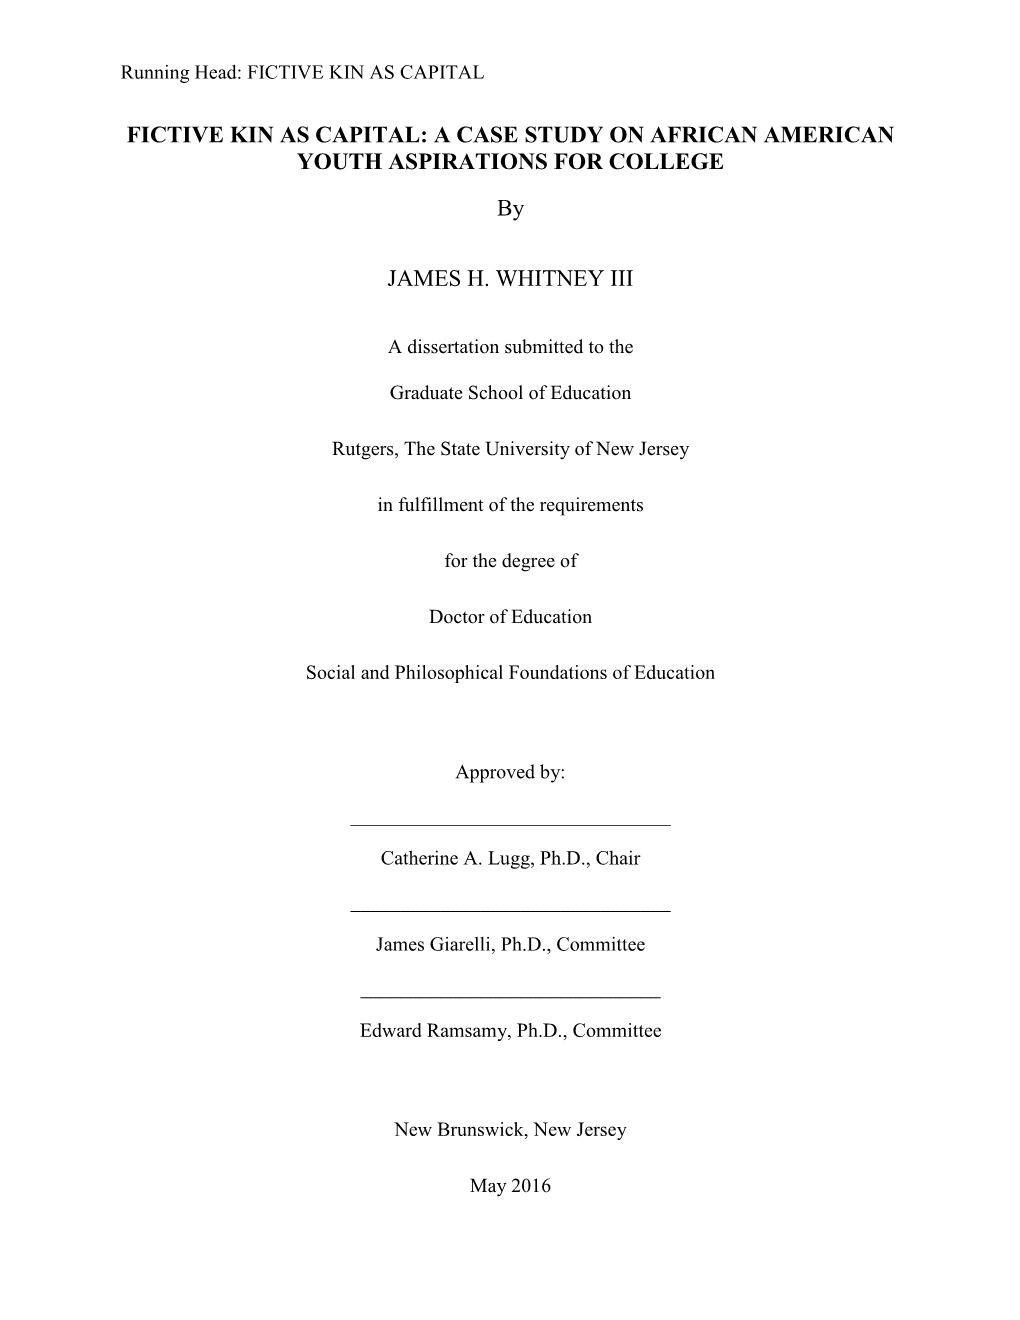 FICTIVE KIN AS CAPITAL: a CASE STUDY on AFRICAN AMERICAN YOUTH ASPIRATIONS for COLLEGE by JAMES H. WHITNEY III Dissertation Chair: Catherine A